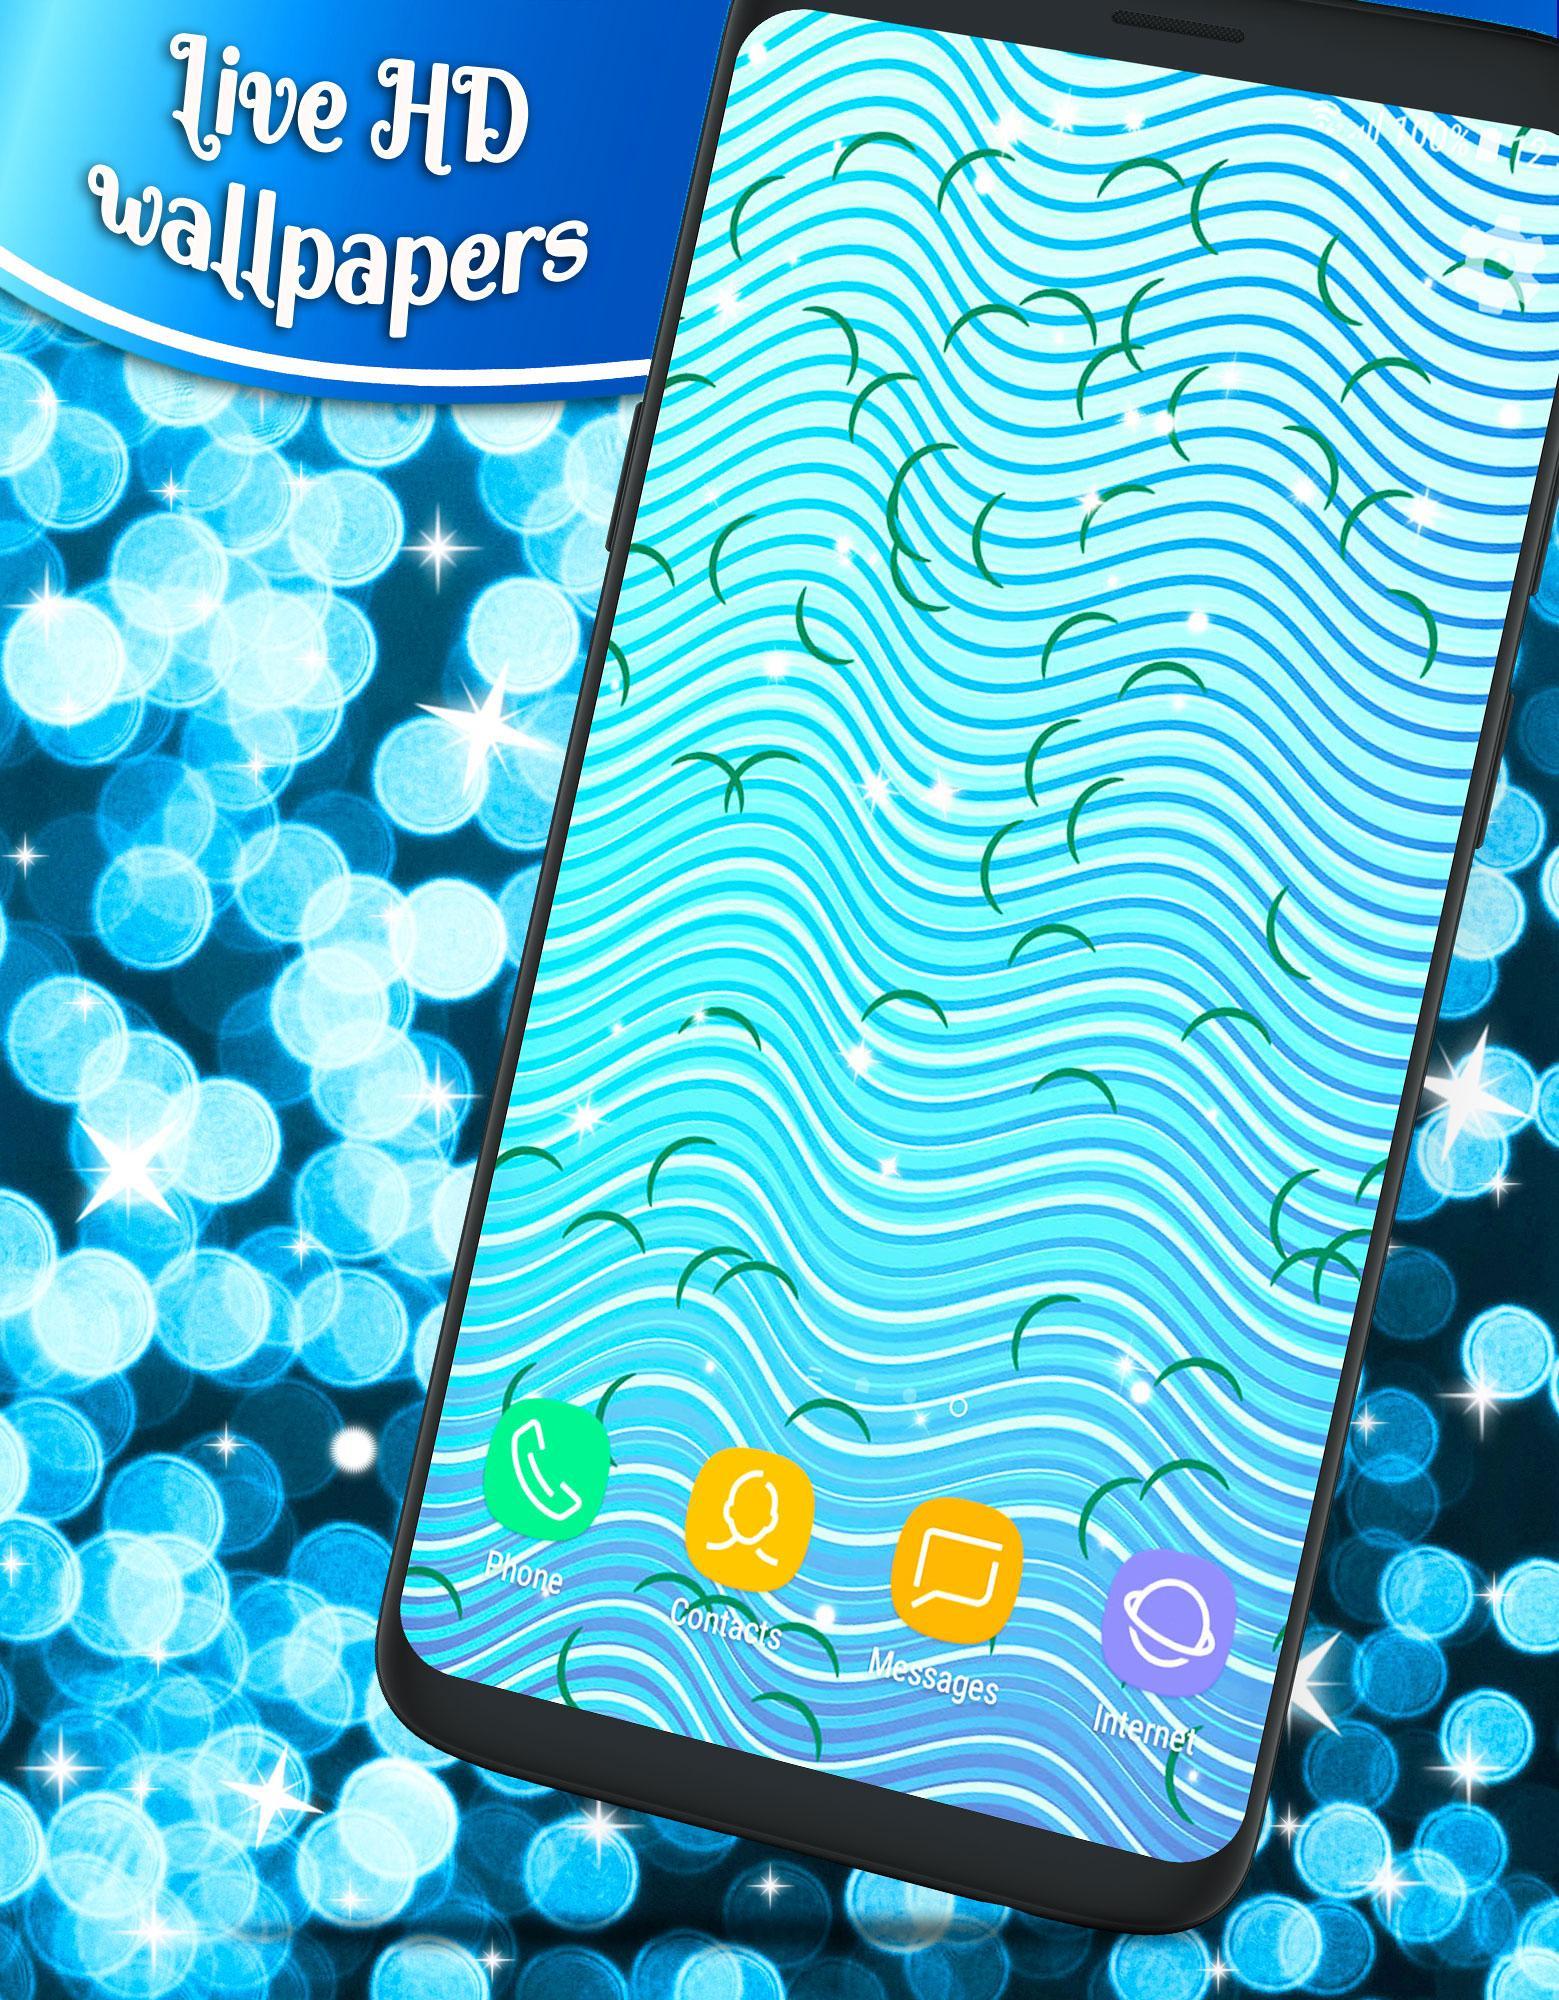 Best Live Wallpaper Themes for Android - APK Download